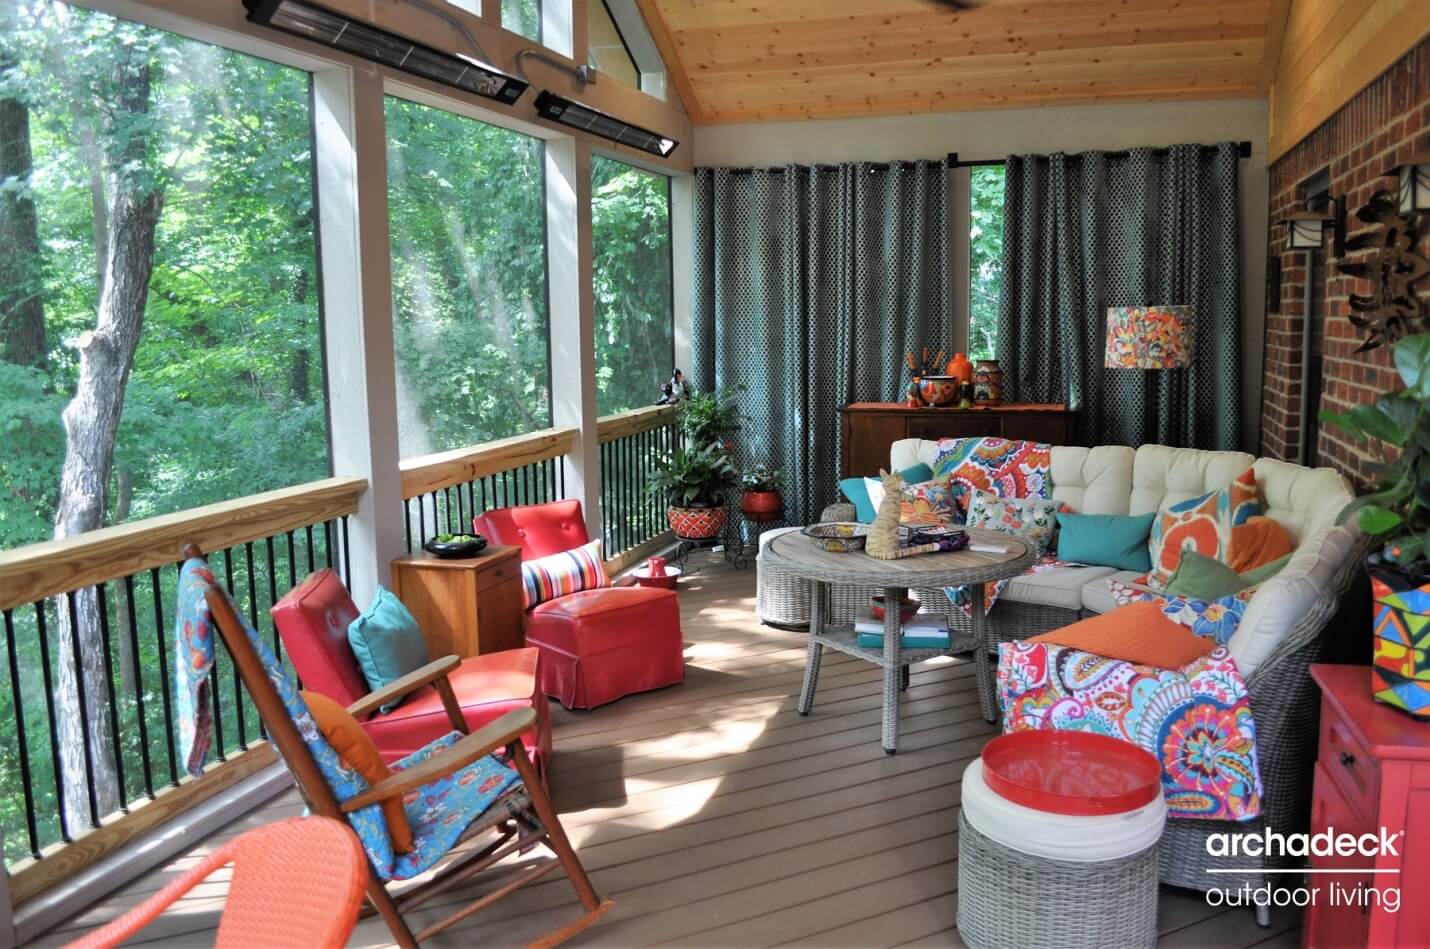 Lookout Mountain Screened Porch with colorful decor